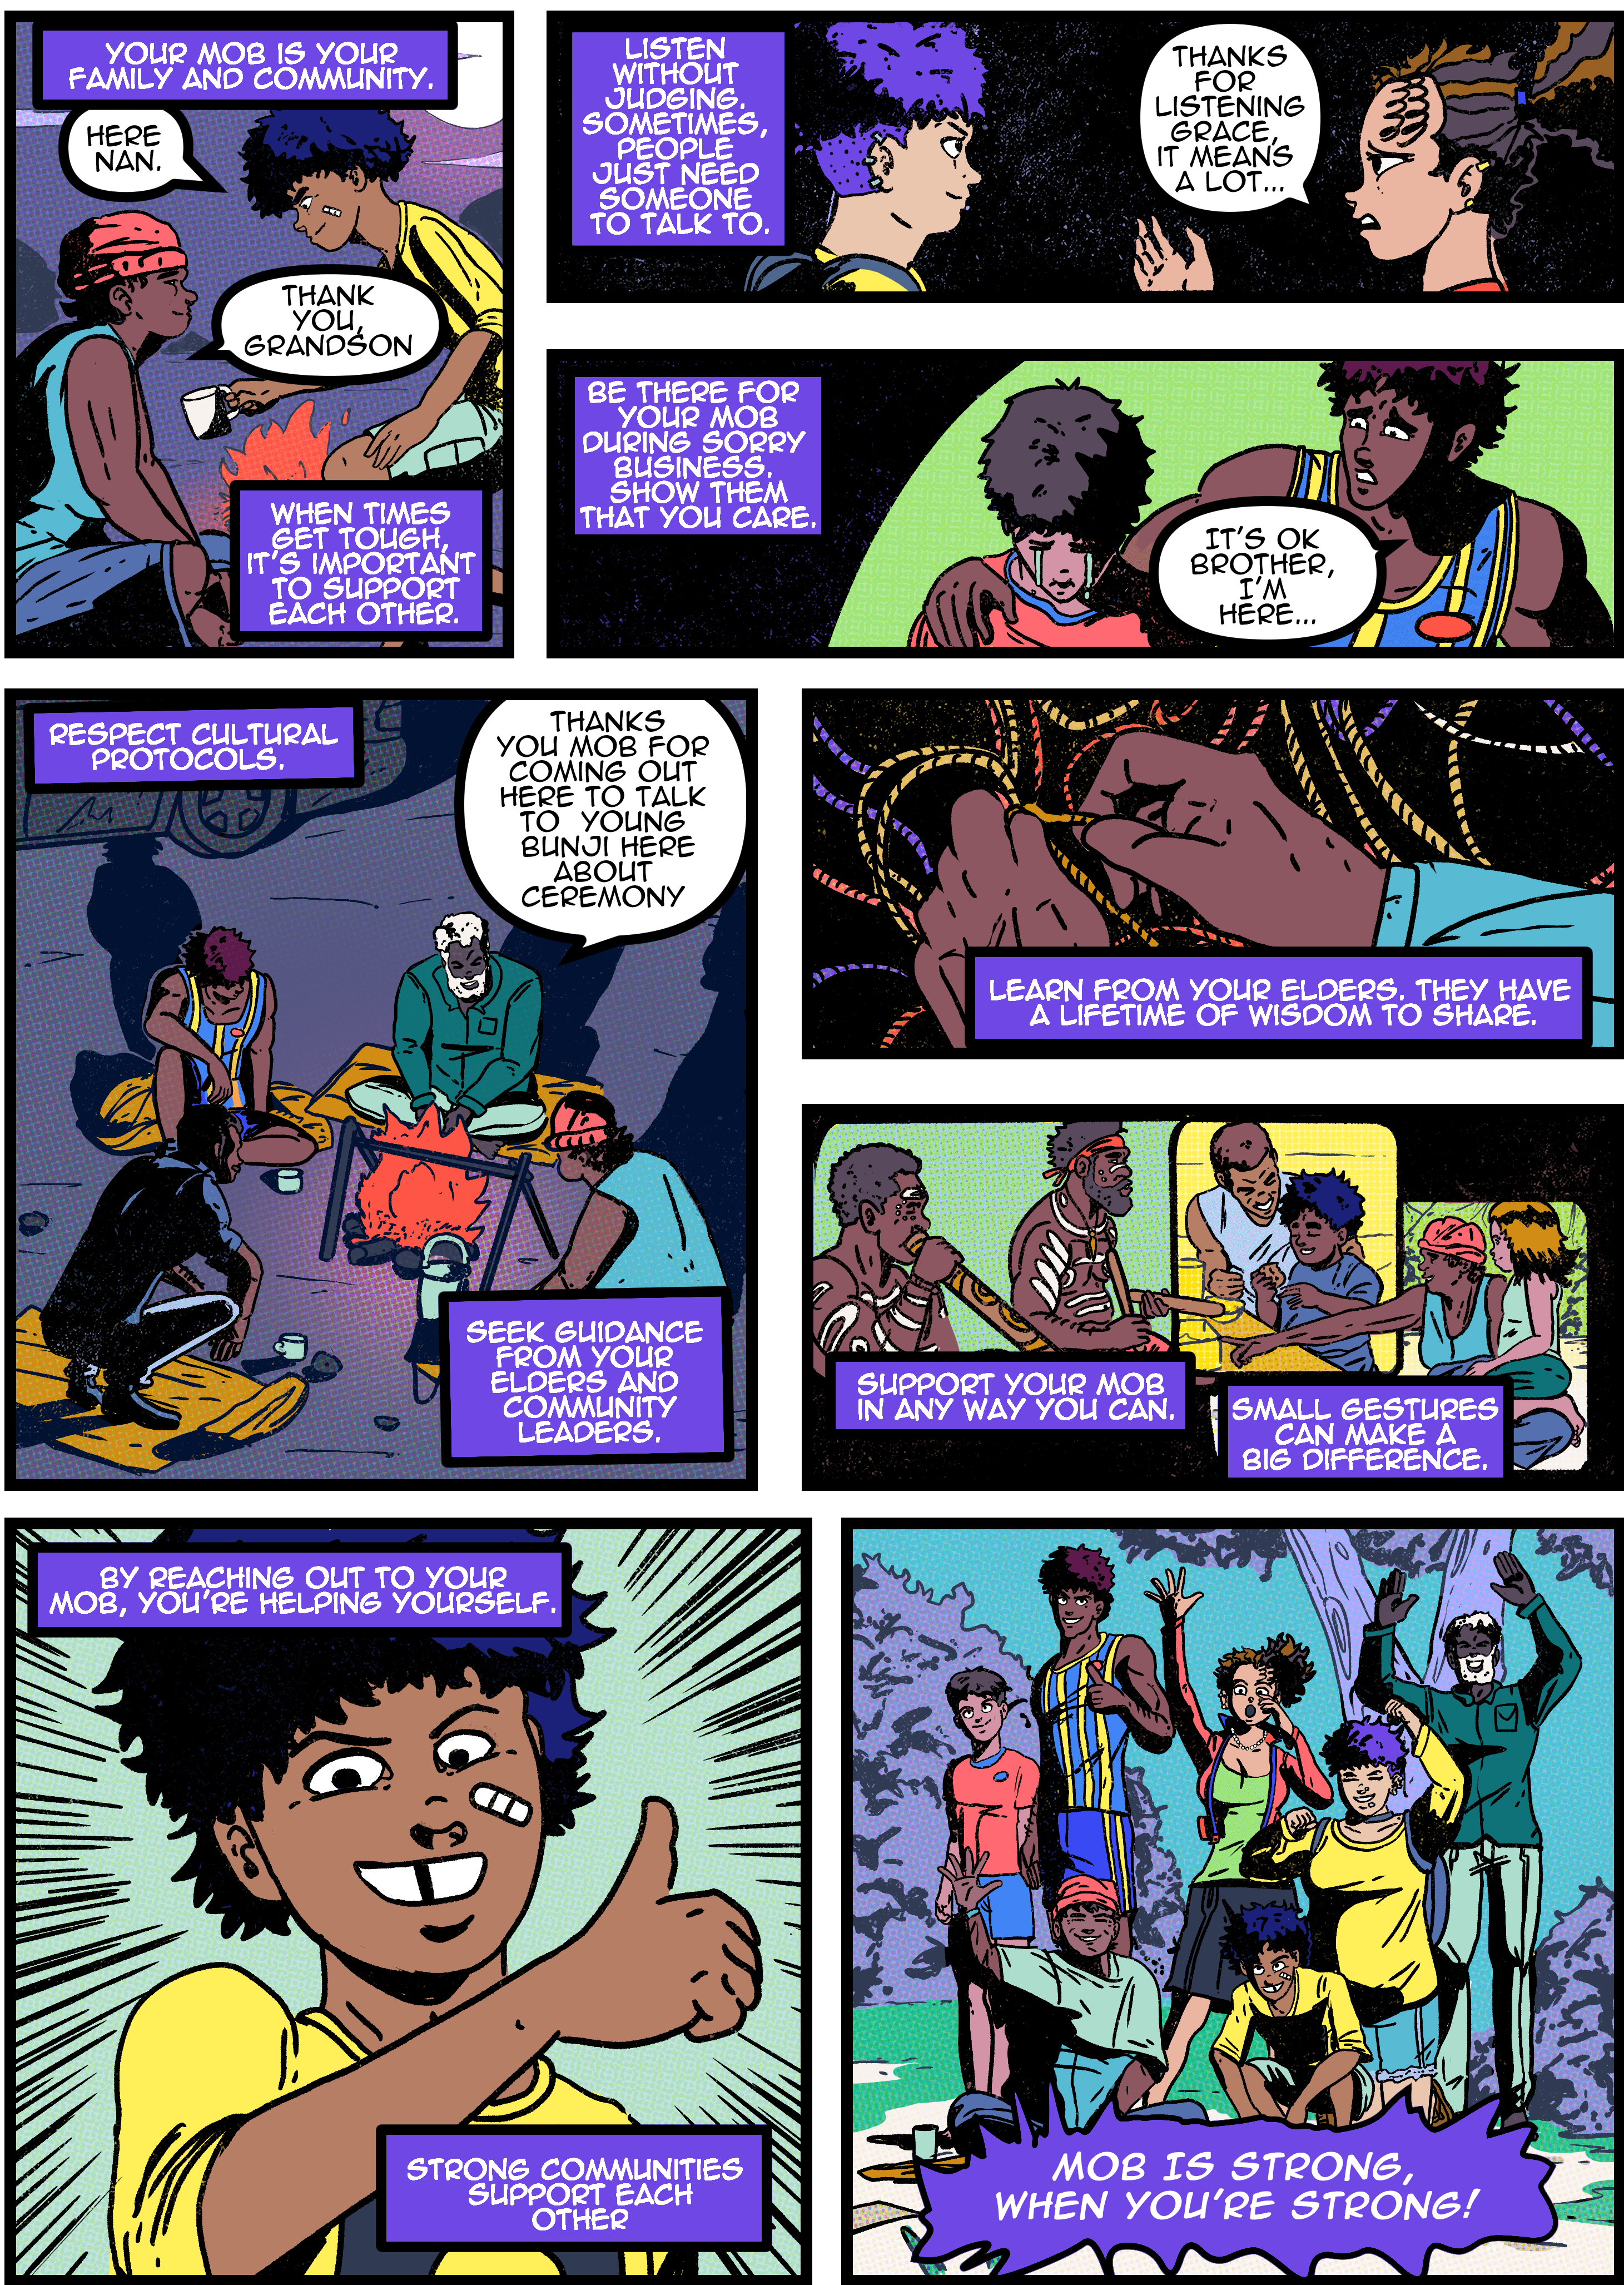 Comic featuring various scenarios where a young boy is helping out his mob.